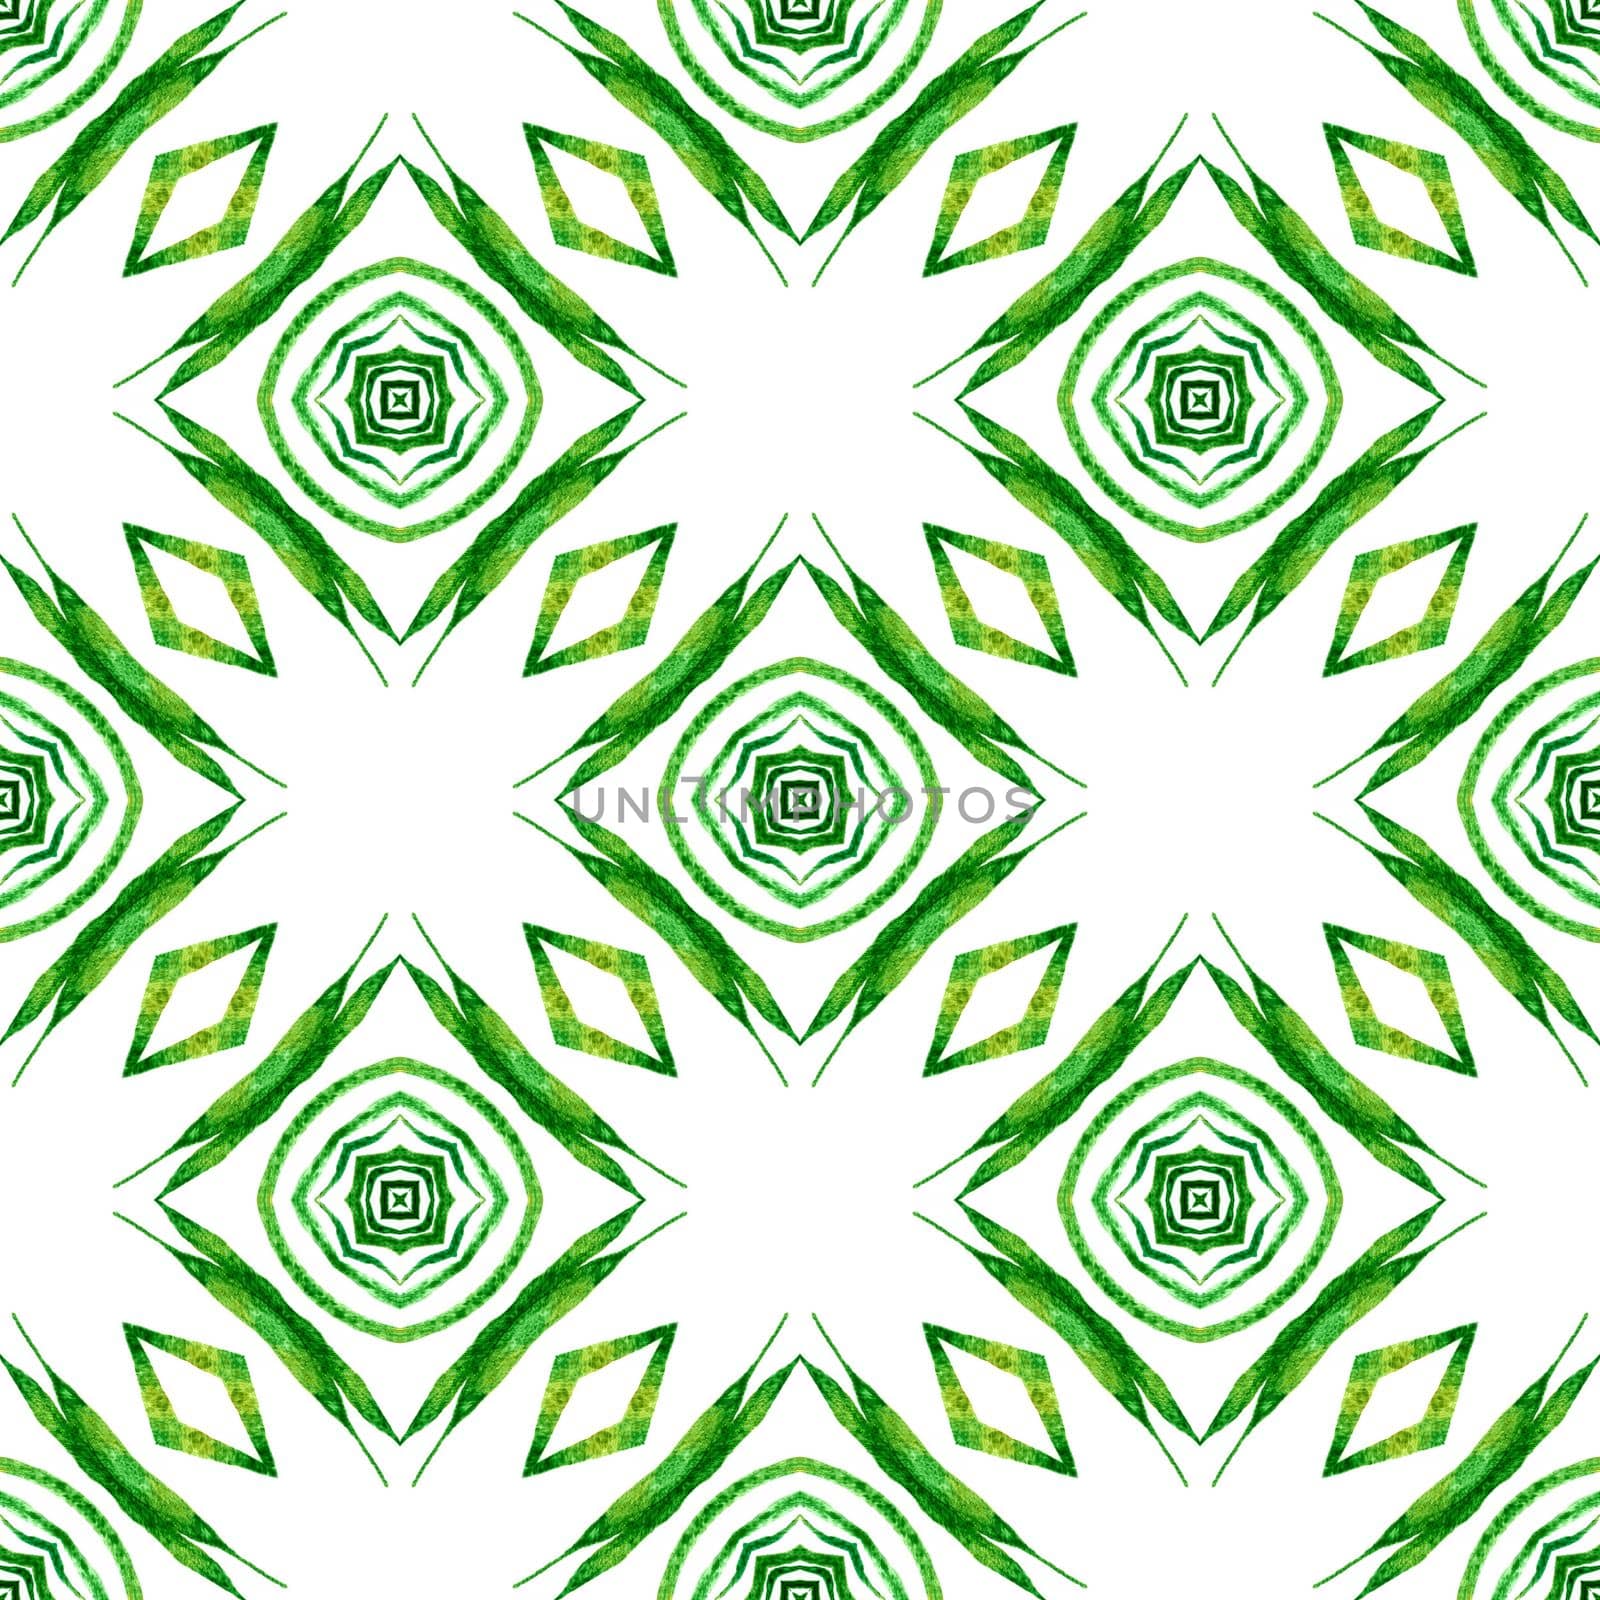 Textile ready sightly print, swimwear fabric, wallpaper, wrapping. Green nice boho chic summer design. Tiled watercolor background. Hand painted tiled watercolor border.